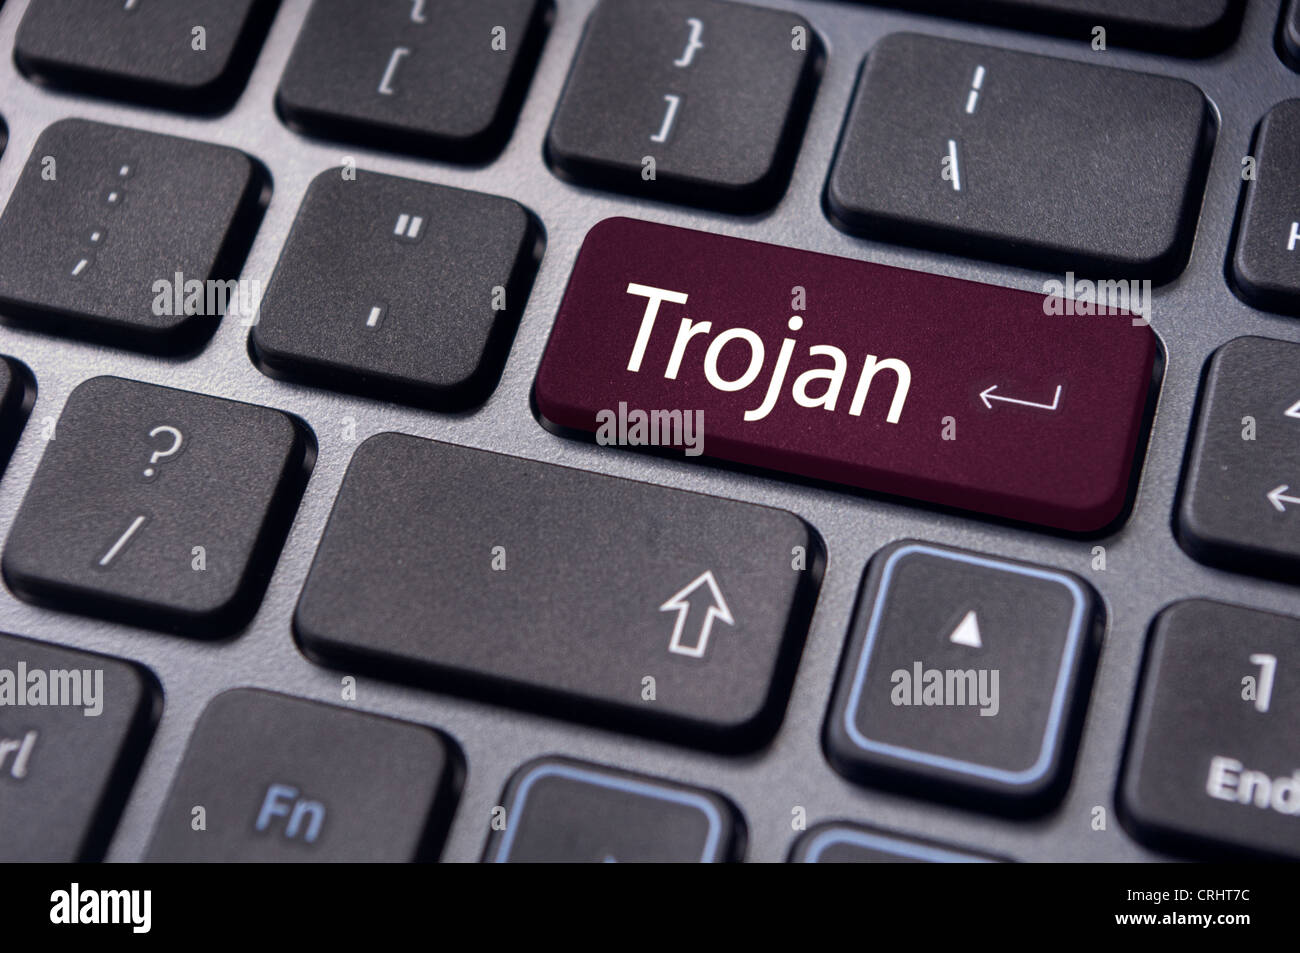 trojan virus for computer, with message on enter key of keyboard. Stock Photo